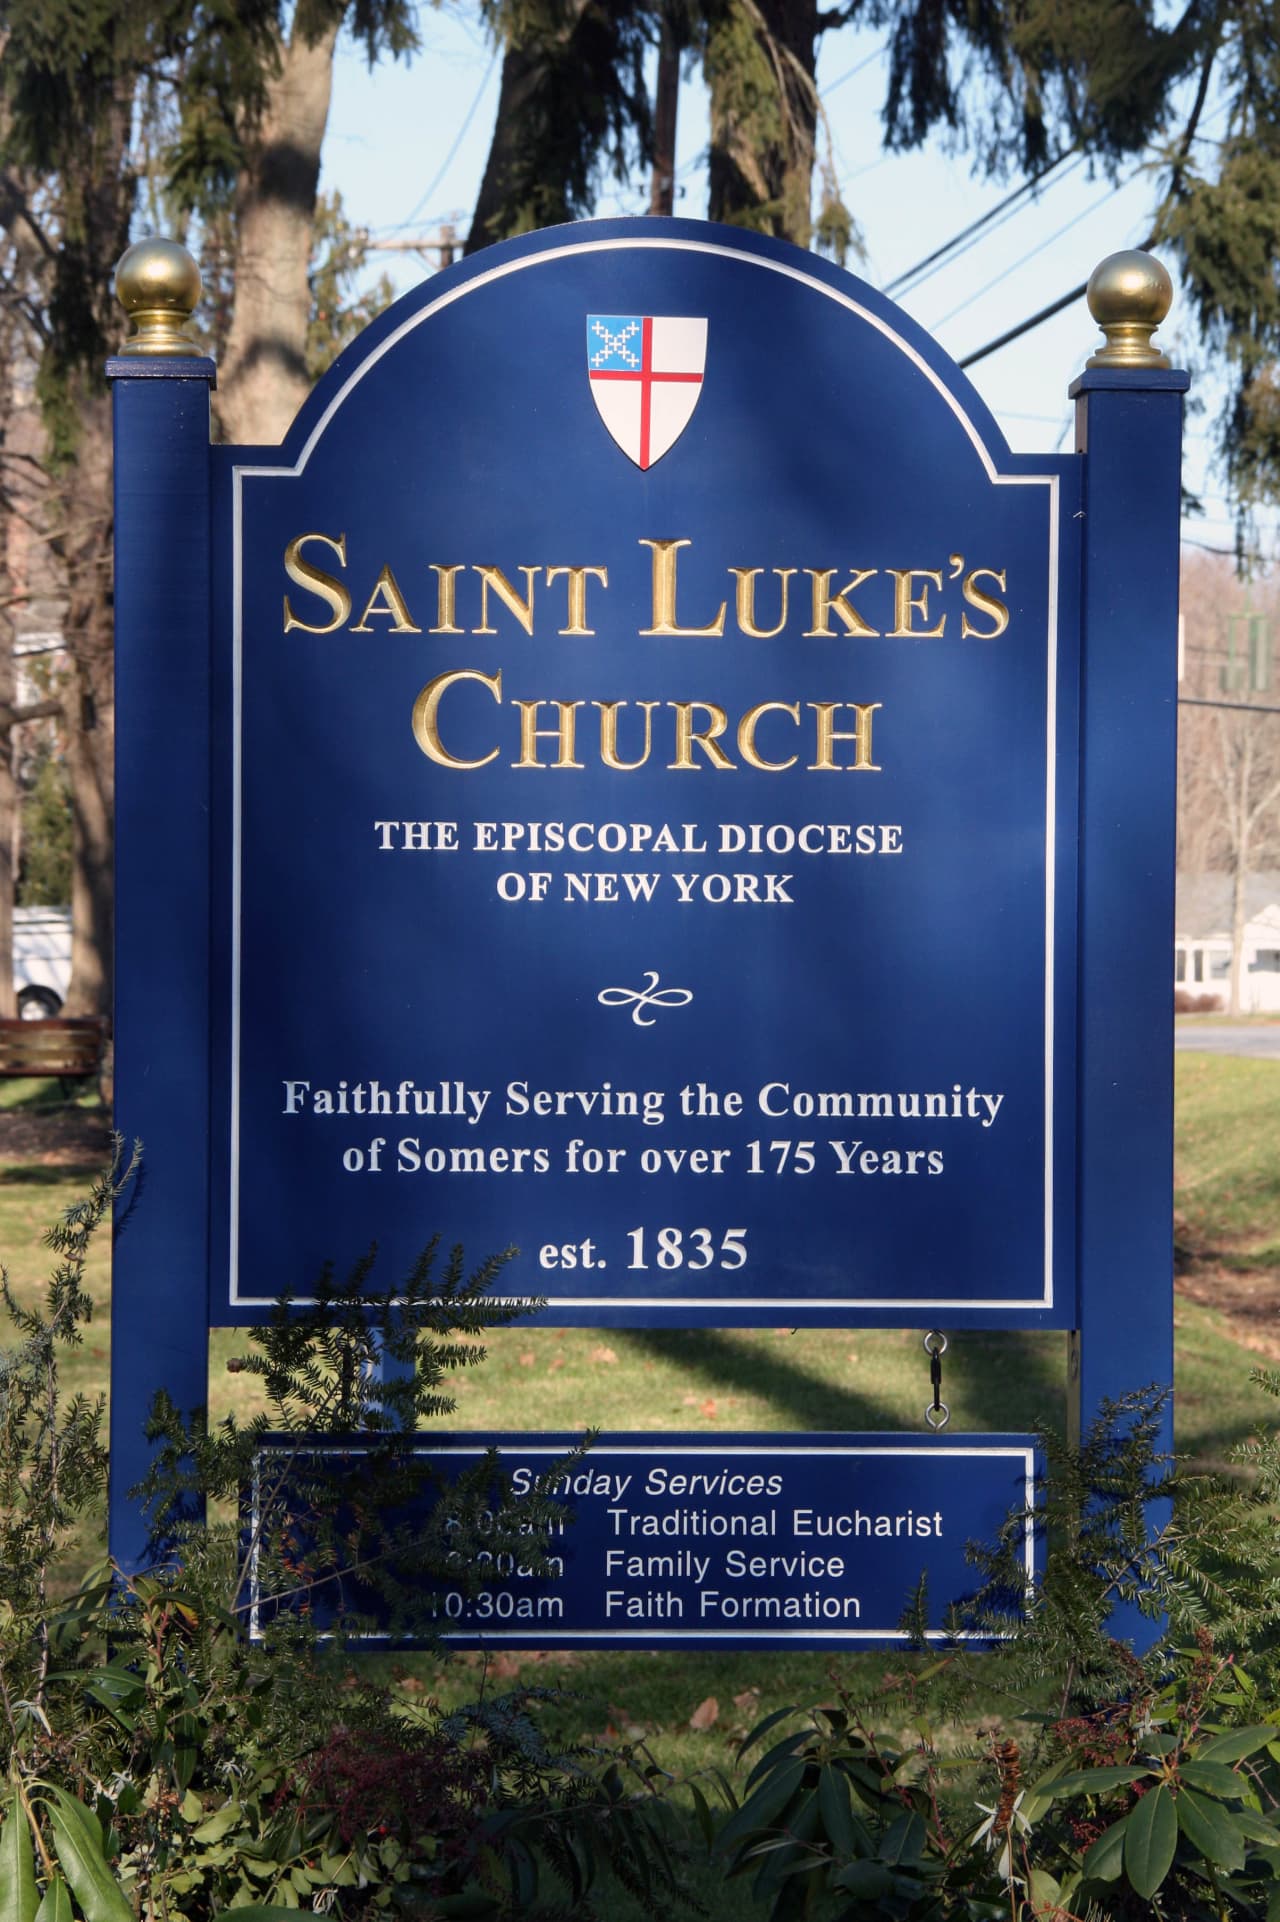 St. Luke's Episcopal Church is located on Route 100 in Somers.